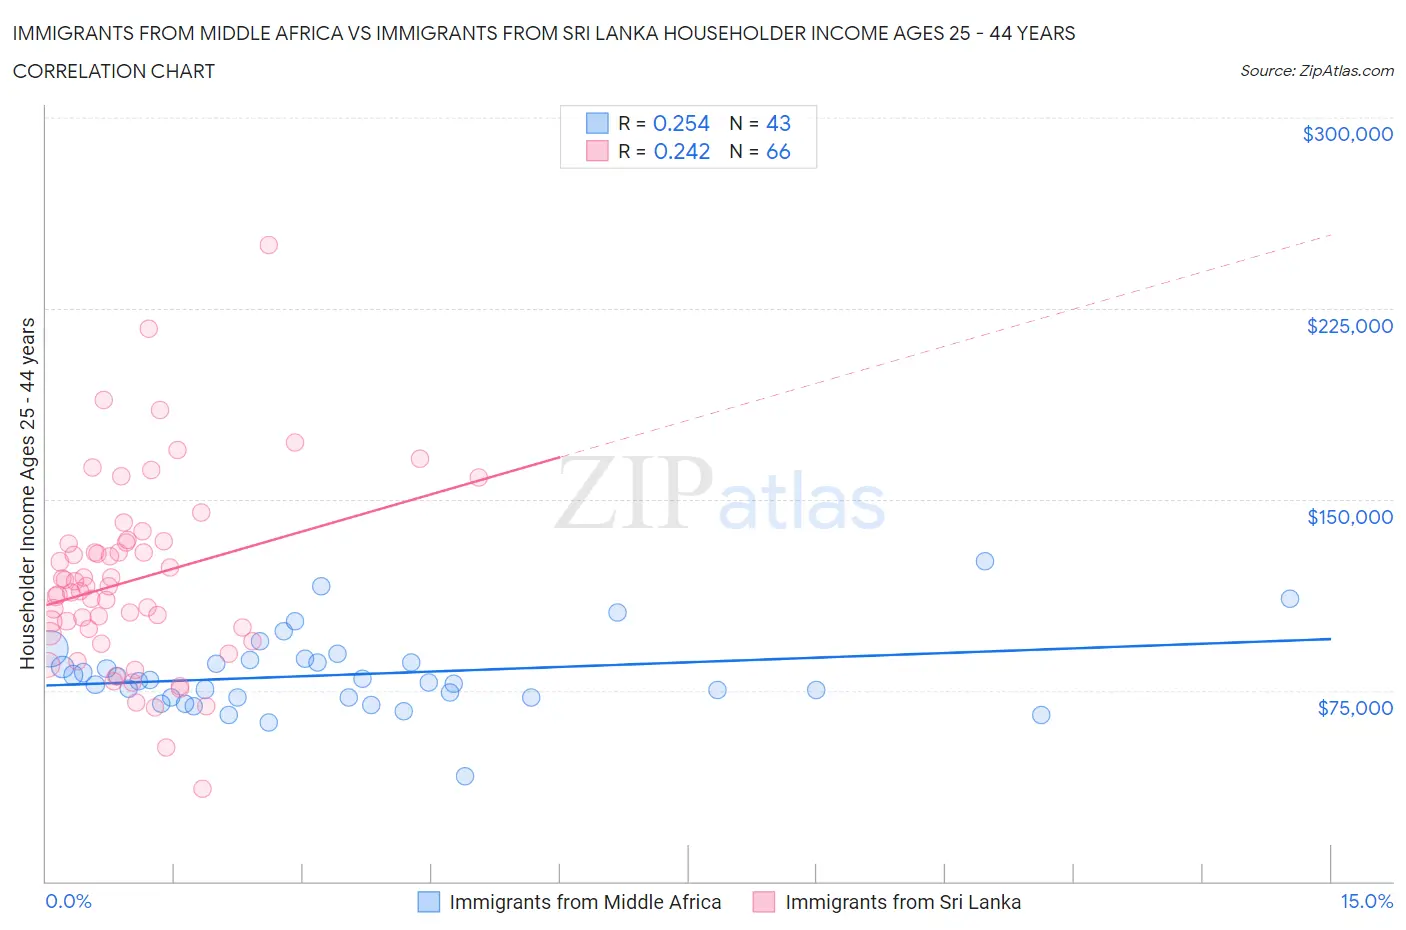 Immigrants from Middle Africa vs Immigrants from Sri Lanka Householder Income Ages 25 - 44 years